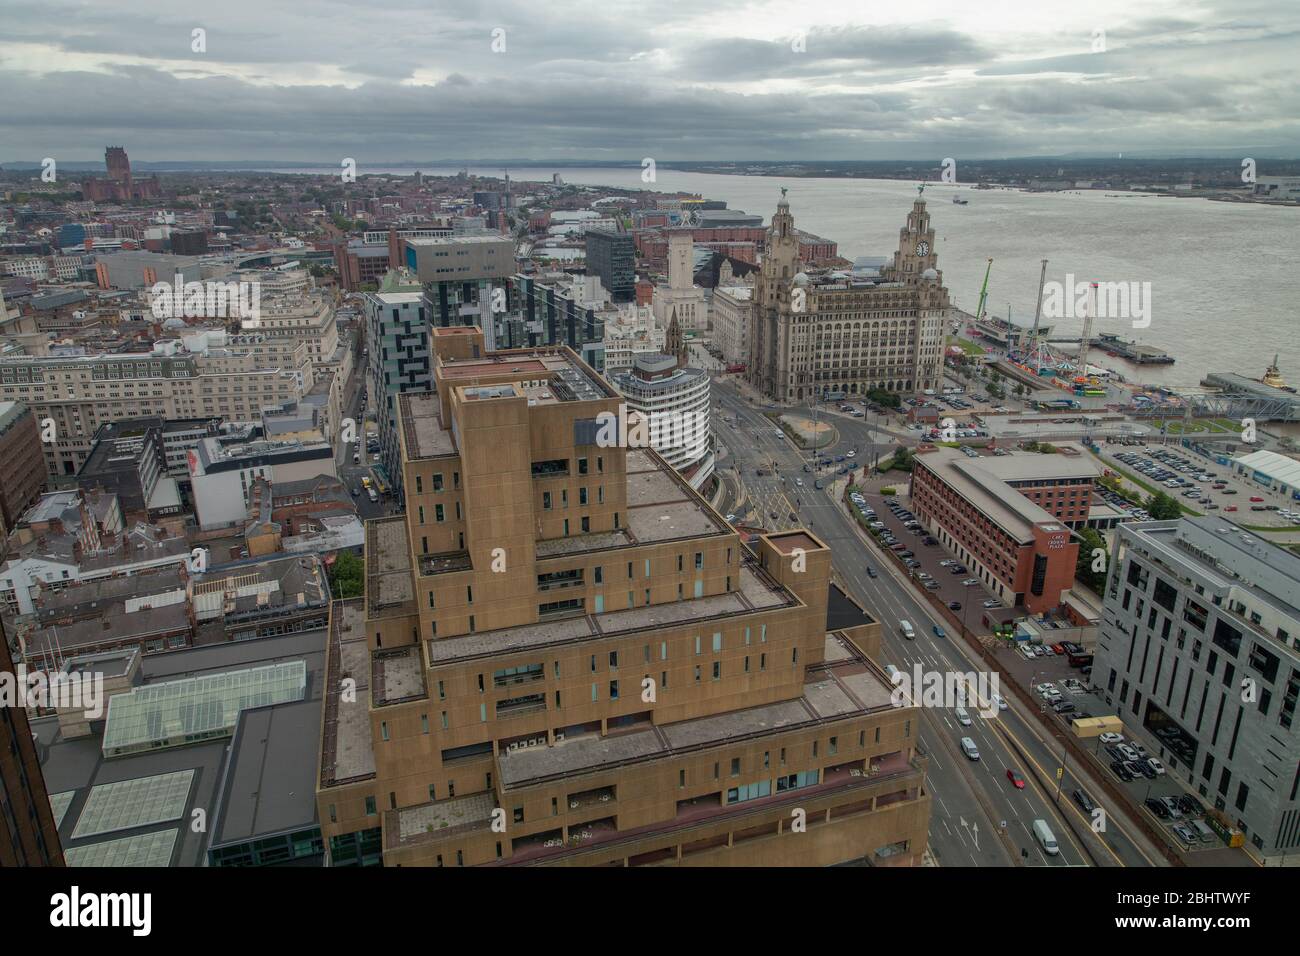 The southern docks in Liverpool seen from the Panoramic 34 restaurant including the Royal Liver Building, Albert Dock and the Wheel of Liverpool Stock Photo